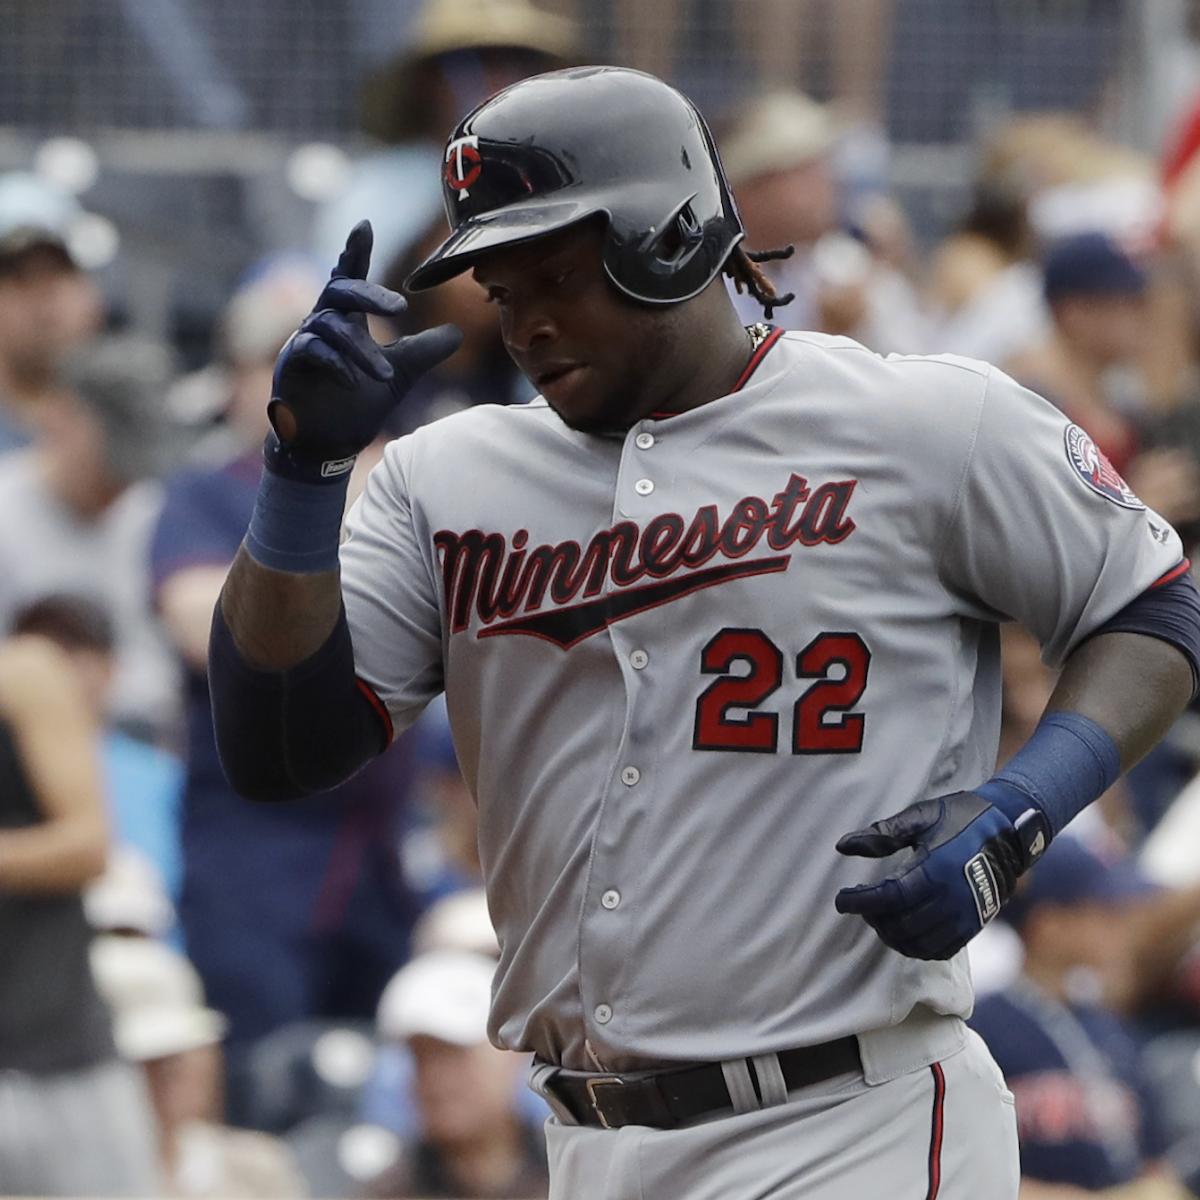 Tired of his helmet falling off, Twins' Miguel Sano cuts his hair